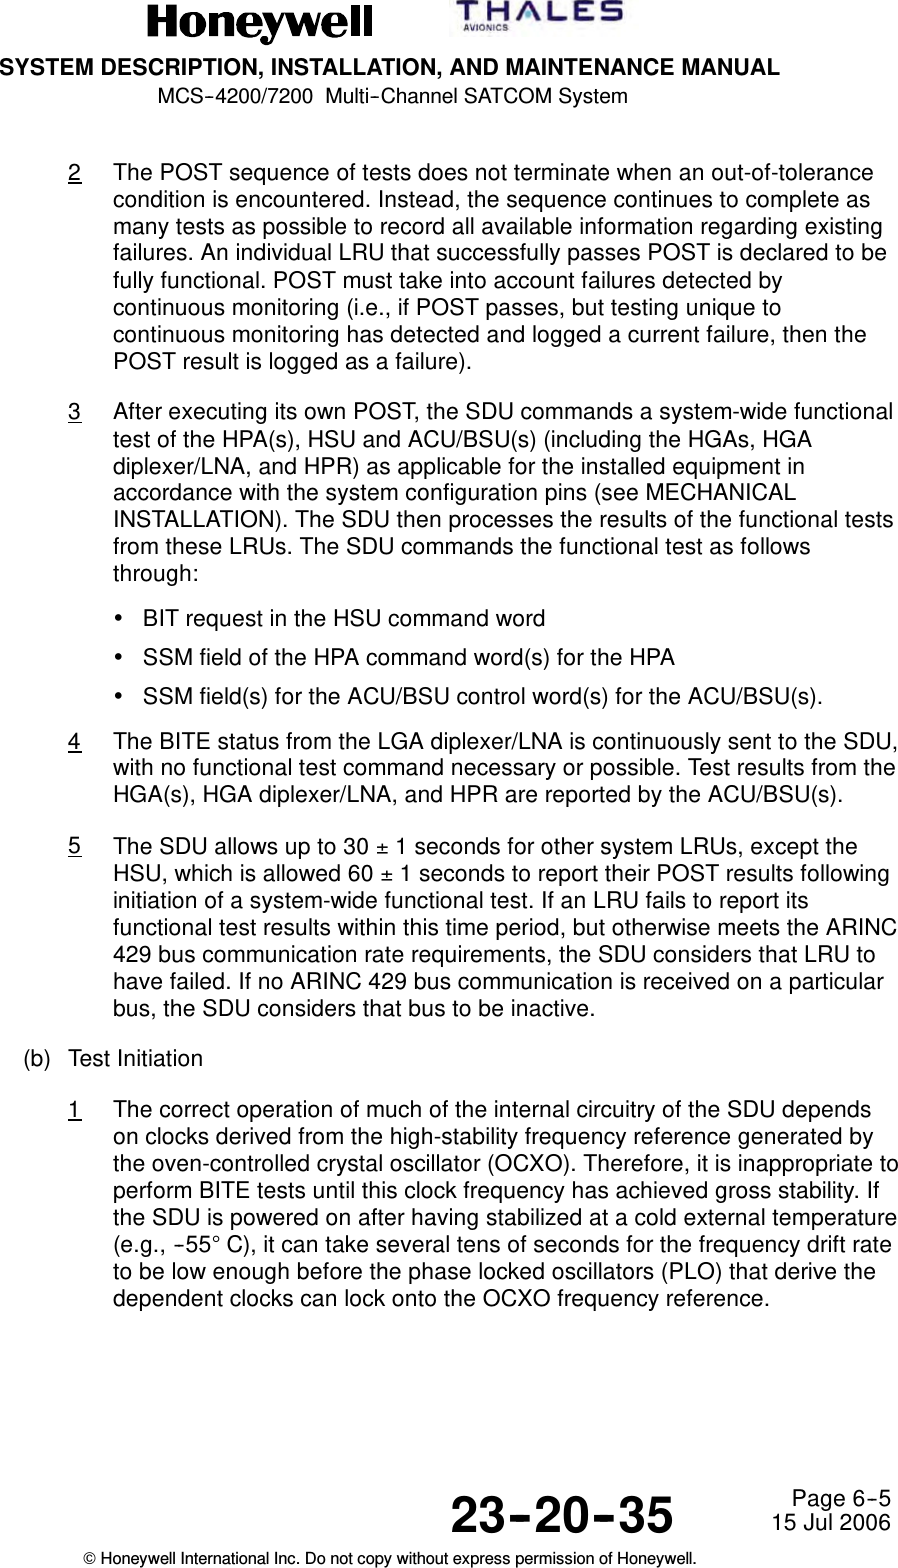 SYSTEM DESCRIPTION, INSTALLATION, AND MAINTENANCE MANUALMCS--4200/7200 Multi--Channel SATCOM System23--20--35 15 Jul 2006Honeywell International Inc. Do not copy without express permission of Honeywell.Page 6--52The POST sequence of tests does not terminate when an out-of-tolerancecondition is encountered. Instead, the sequence continues to complete asmany tests as possible to record all available information regarding existingfailures. An individual LRU that successfully passes POST is declared to befully functional. POST must take into account failures detected bycontinuous monitoring (i.e., if POST passes, but testing unique tocontinuous monitoring has detected and logged a current failure, then thePOST result is logged as a failure).3After executing its own POST, the SDU commands a system-wide functionaltest of the HPA(s), HSU and ACU/BSU(s) (including the HGAs, HGAdiplexer/LNA, and HPR) as applicable for the installed equipment inaccordance with the system configuration pins (see MECHANICALINSTALLATION). The SDU then processes the results of the functional testsfrom these LRUs. The SDU commands the functional test as followsthrough:•BIT request in the HSU command word•SSM field of the HPA command word(s) for the HPA•SSM field(s) for the ACU/BSU control word(s) for the ACU/BSU(s).4The BITE status from the LGA diplexer/LNA is continuously sent to the SDU,with no functional test command necessary or possible. Test results from theHGA(s), HGA diplexer/LNA, and HPR are reported by the ACU/BSU(s).5The SDU allows up to 30 ±1 seconds for other system LRUs, except theHSU, which is allowed 60 ±1 seconds to report their POST results followinginitiation of a system-wide functional test. If an LRU fails to report itsfunctional test results within this time period, but otherwise meets the ARINC429 bus communication rate requirements, the SDU considers that LRU tohave failed. If no ARINC 429 bus communication is received on a particularbus, the SDU considers that bus to be inactive.(b) Test Initiation1The correct operation of much of the internal circuitry of the SDU dependson clocks derived from the high-stability frequency reference generated bythe oven-controlled crystal oscillator (OCXO). Therefore, it is inappropriate toperform BITE tests until this clock frequency has achieved gross stability. Ifthe SDU is powered on after having stabilized at a cold external temperature(e.g., --55°C), it can take several tens of seconds for the frequency drift rateto be low enough before the phase locked oscillators (PLO) that derive thedependent clocks can lock onto the OCXO frequency reference.